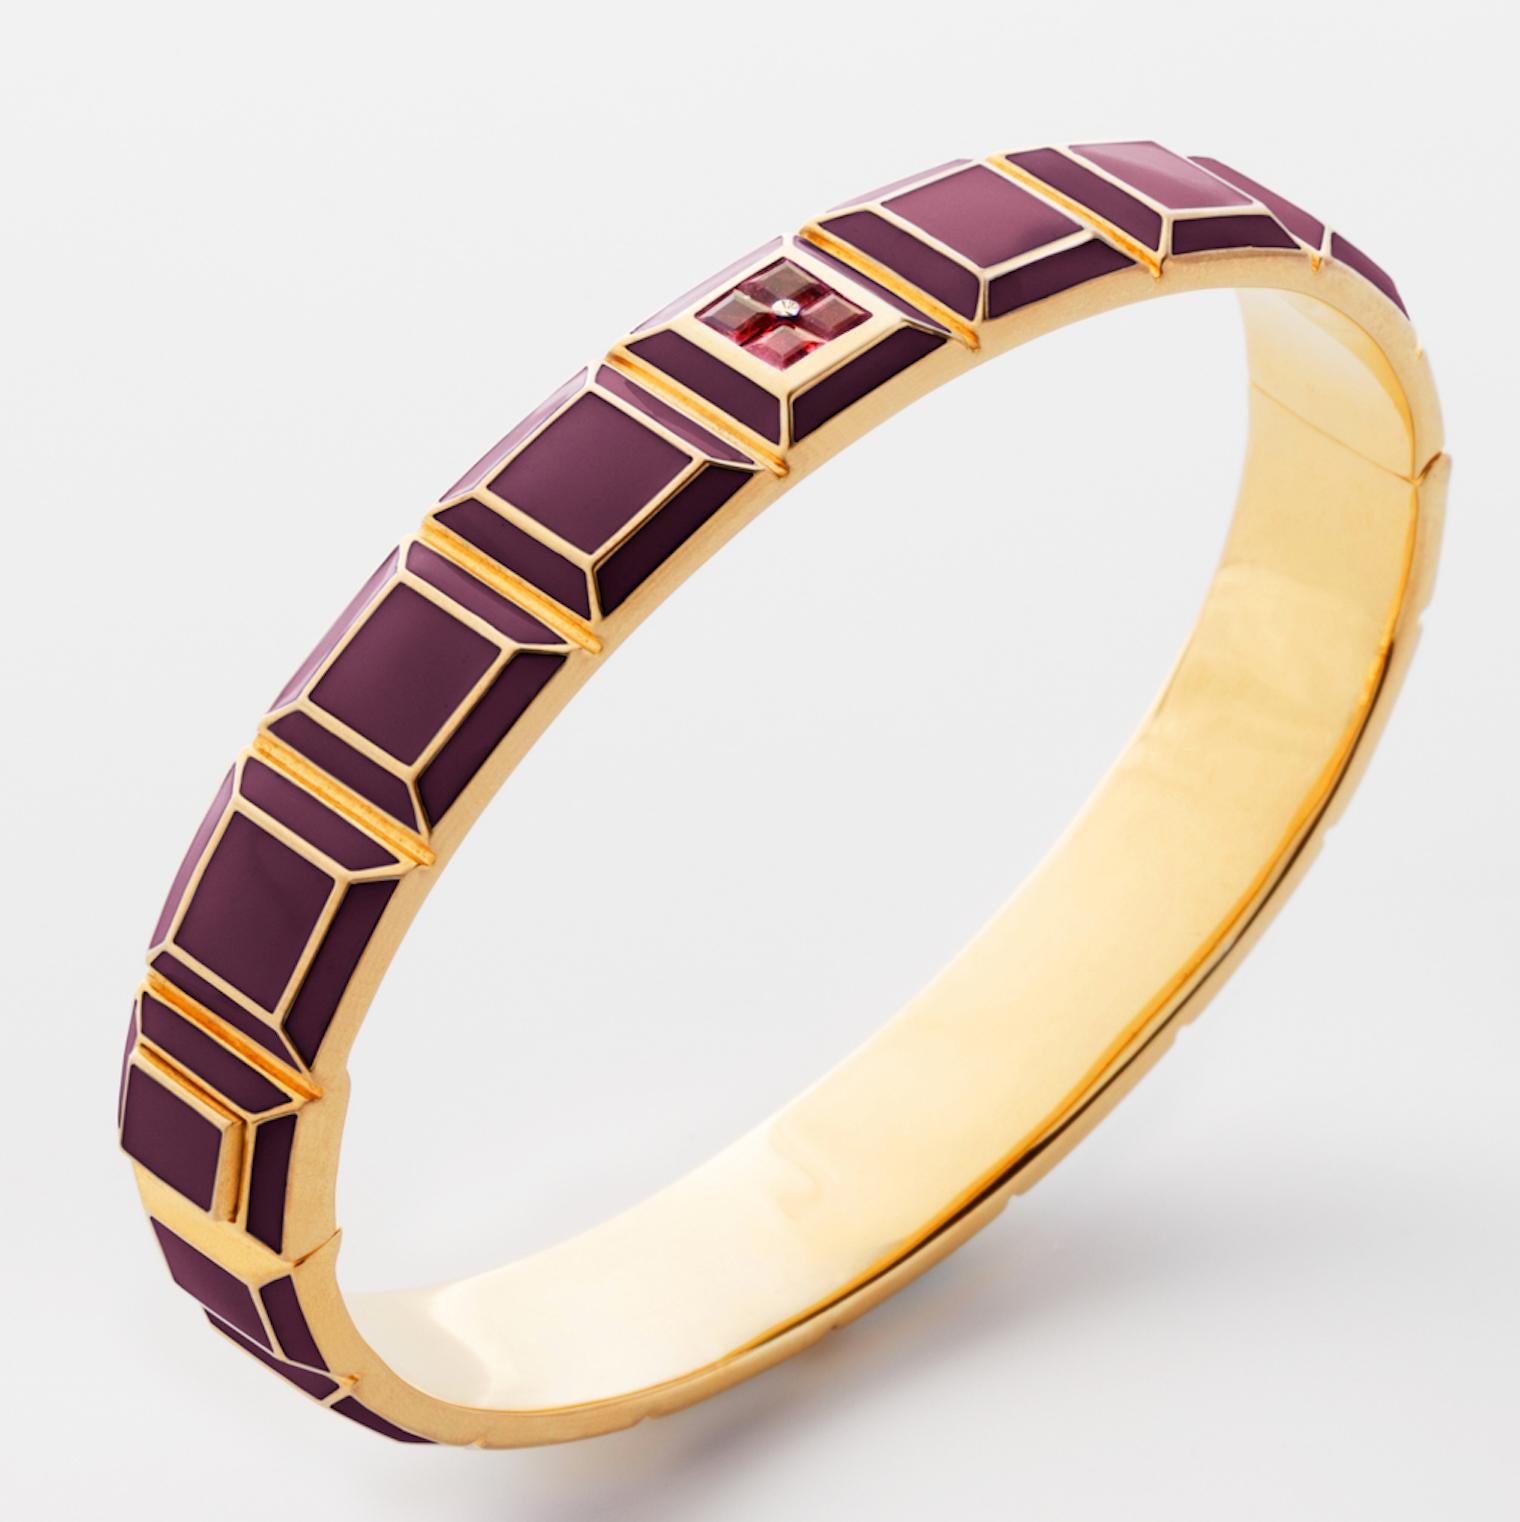 Gold-Plated Enamel Carousel Bracelet features a Yellow Gold Plated Silver bracelet with Bordeaux enamel and rubies, along with a clasp closure that secures the bracelet onto the wearer's wrist. 
Yellow Gold Plated Silver, Bordeaux Enamel, Rubies 